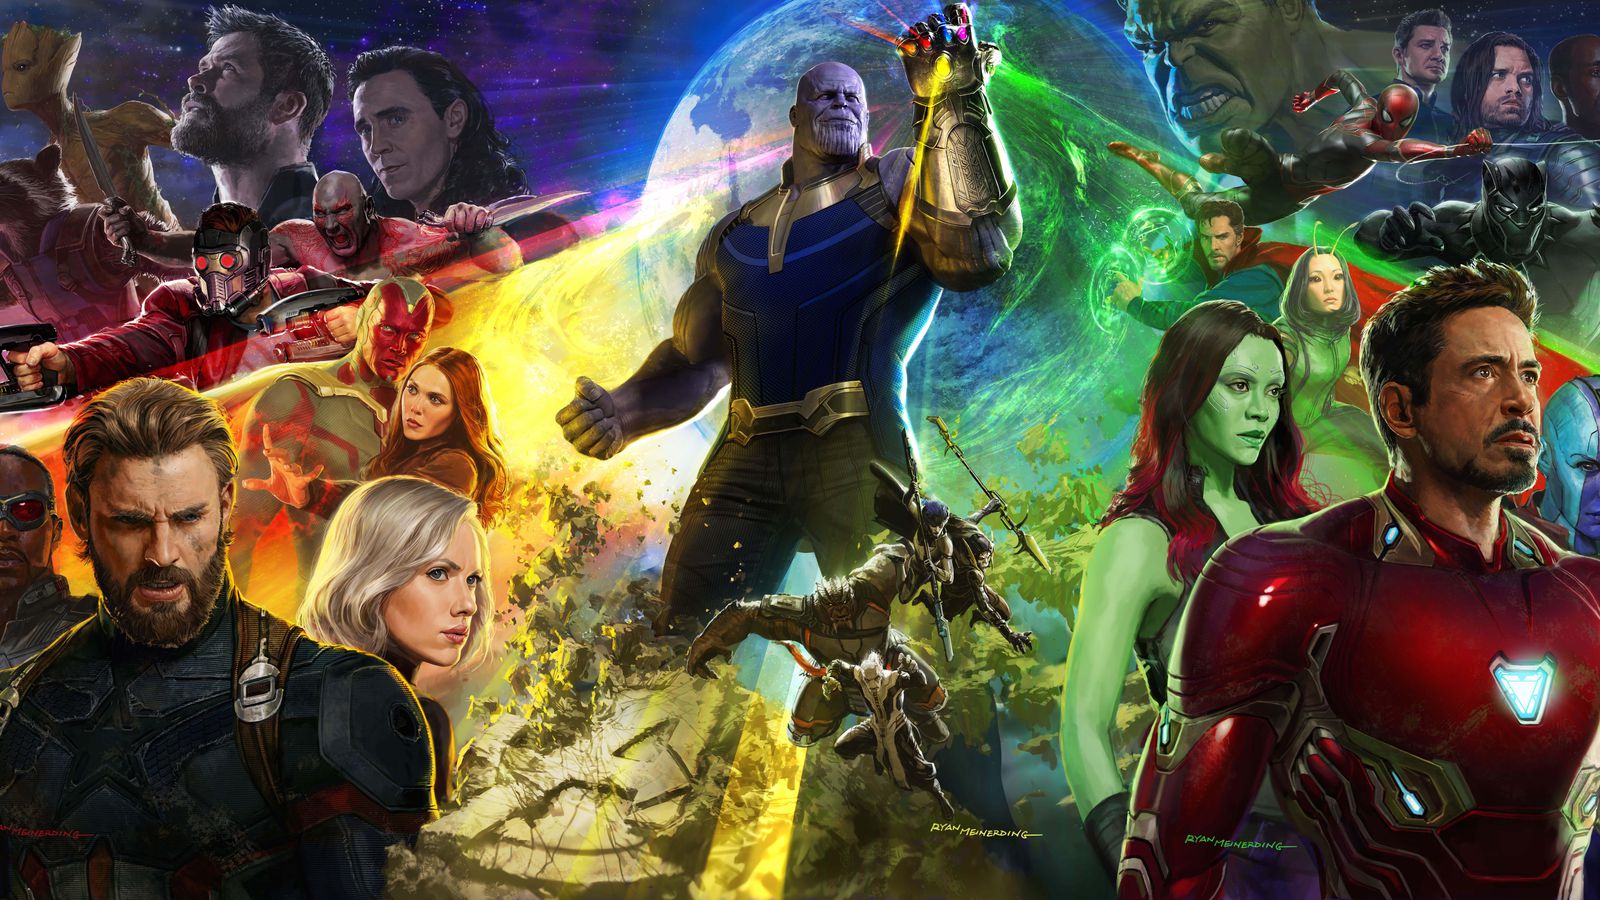 You are reading: Top 10 Marvel Avengers: Infinity War Merchandise for Marvel Fans and Collectors. Image Credits: cnet.com